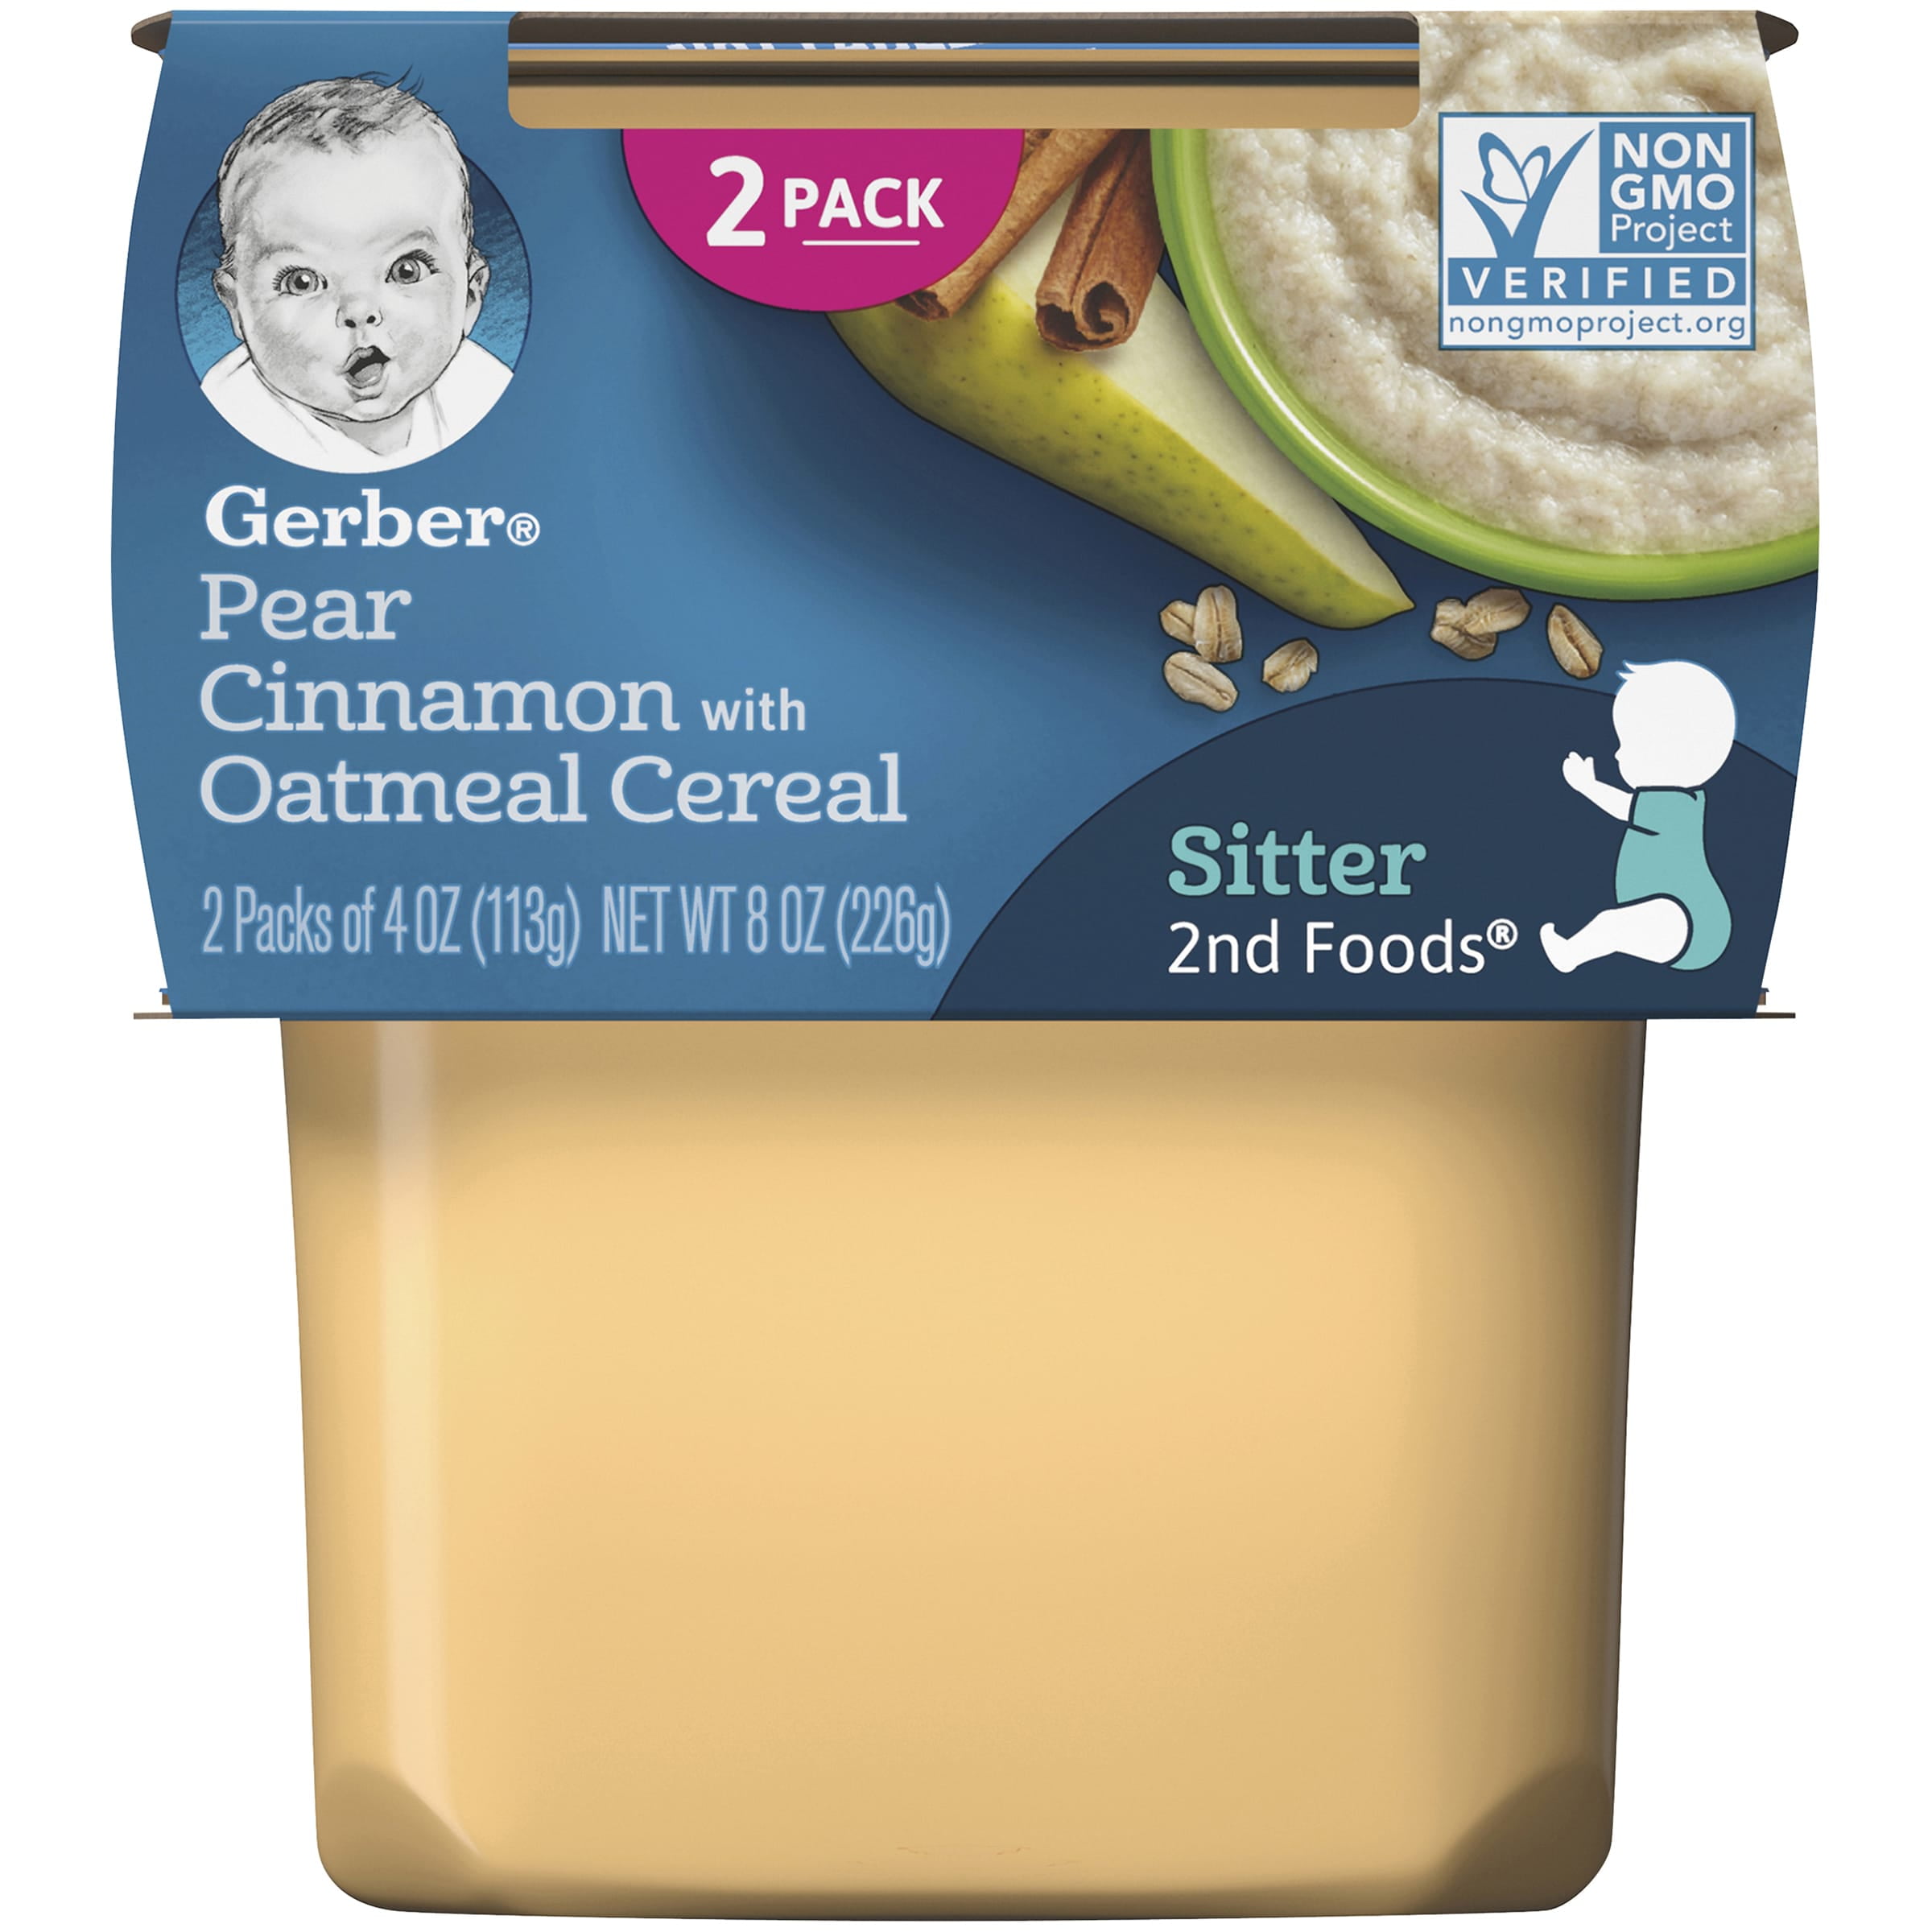 Gerber 2nd Foods Baby Foods, Pear Cinnamon with Oatmeal, 4 oz Tub (2 Pack)